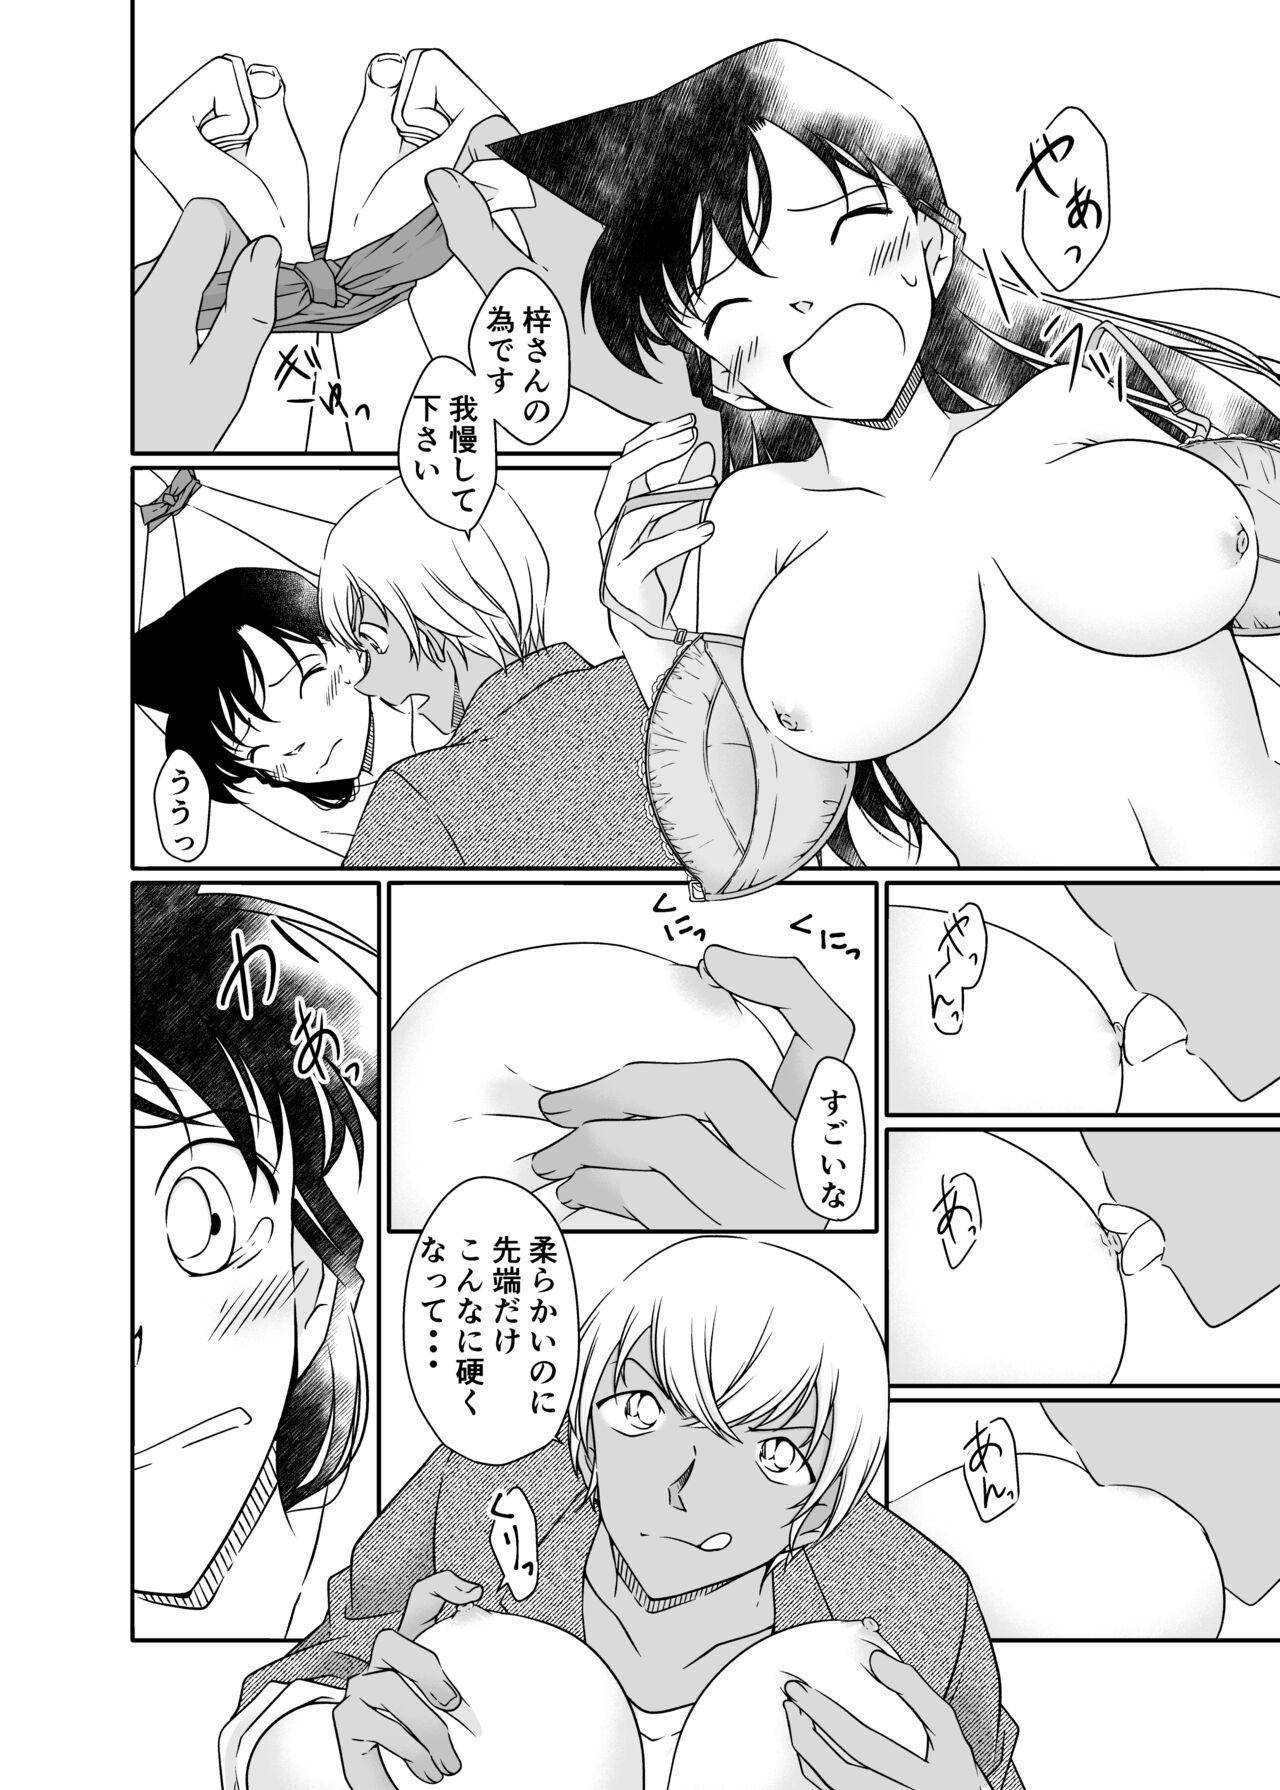 Chichona cooperate with AV shooting for justice - Detective conan | meitantei conan Mom - Page 11